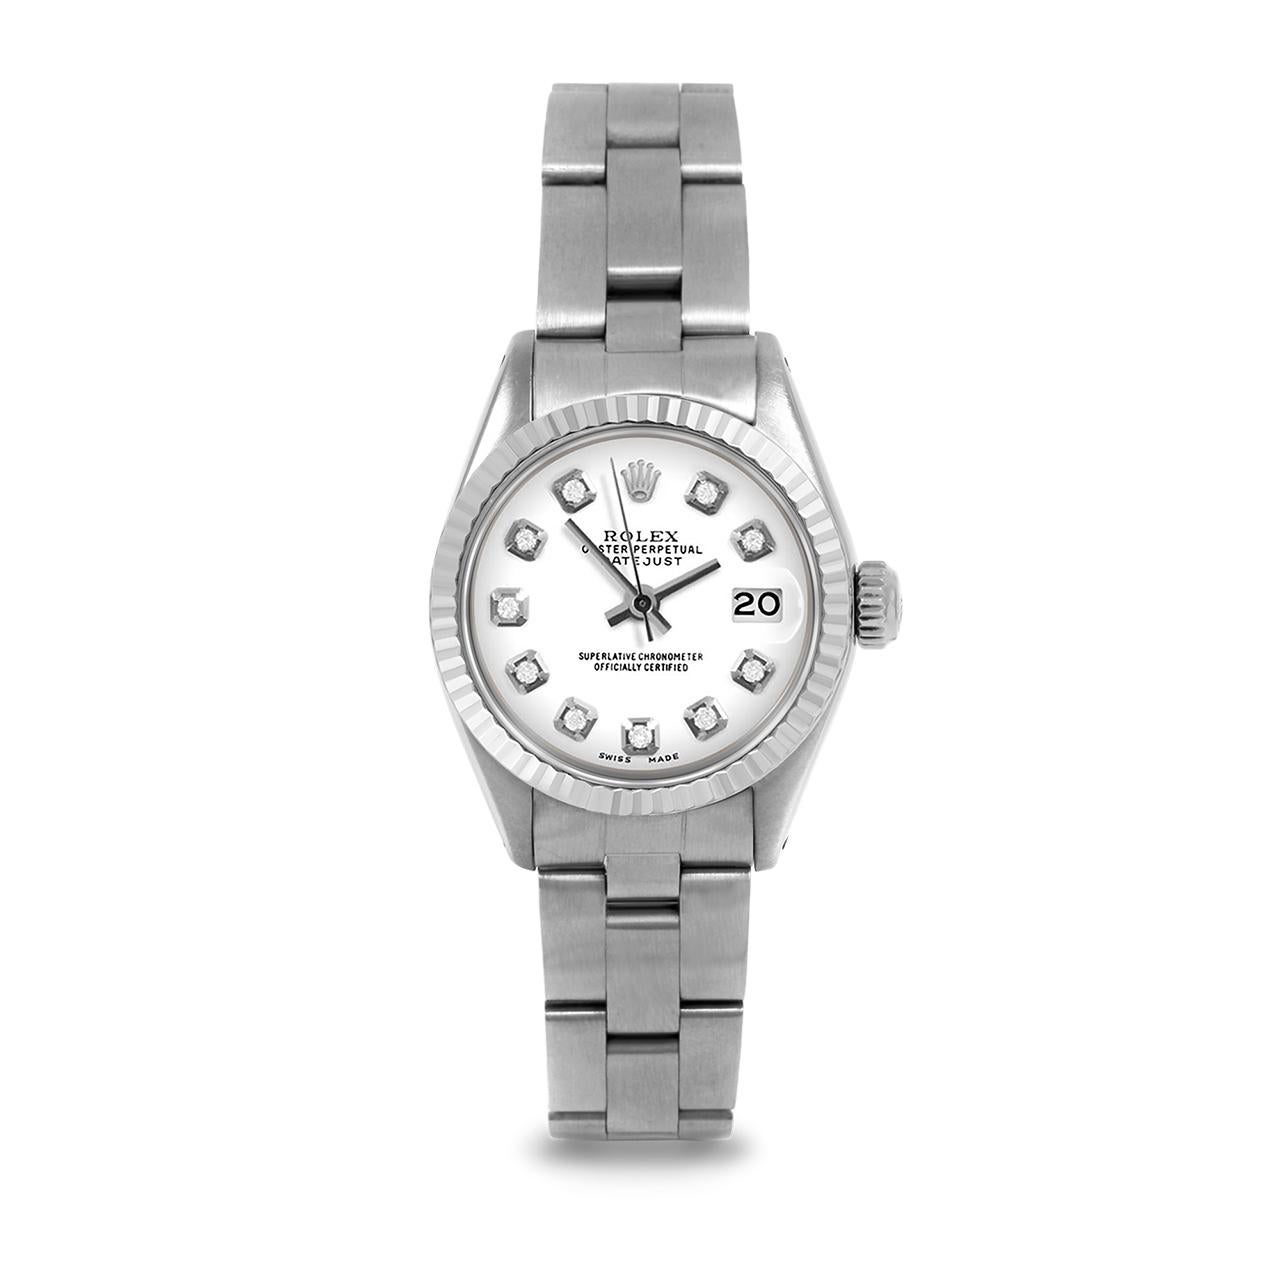 Pre-Owned Rolex 6917 Ladies 26mm Datejust Watch, Custom White Diamond Dial & Fluted Bezel on Rolex Stainless Steel Oyster Band.   

SKU 6917-SS-WHT-DIA-AM-FLT-OYS


Brand/Model:        Rolex Datejust
Model Number:        6917
Style:       